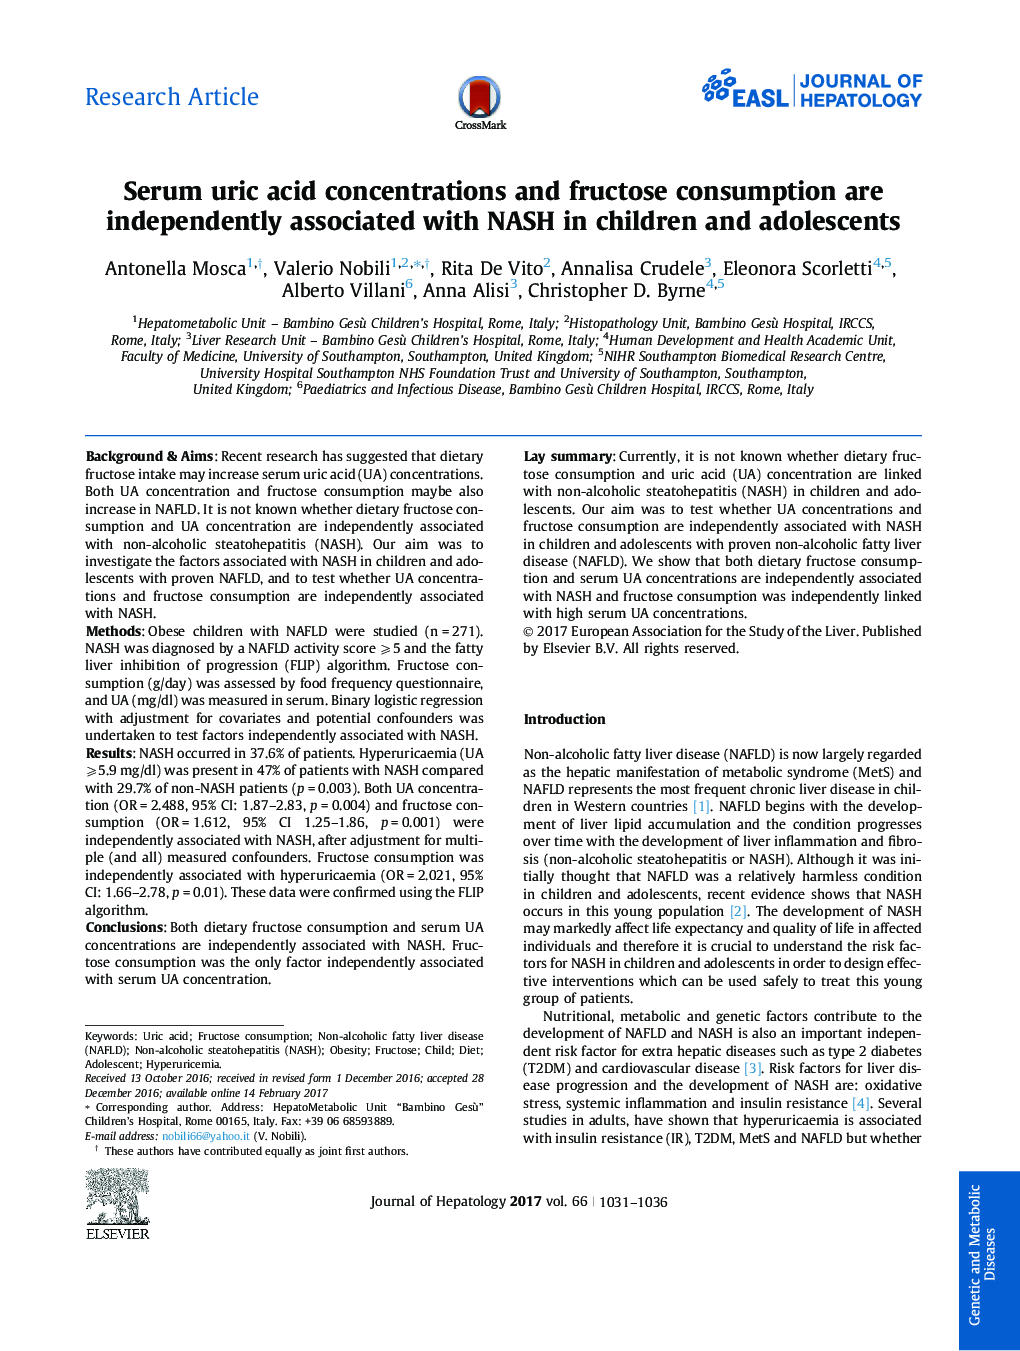 Serum uric acid concentrations and fructose consumption are independently associated with NASH in children and adolescents